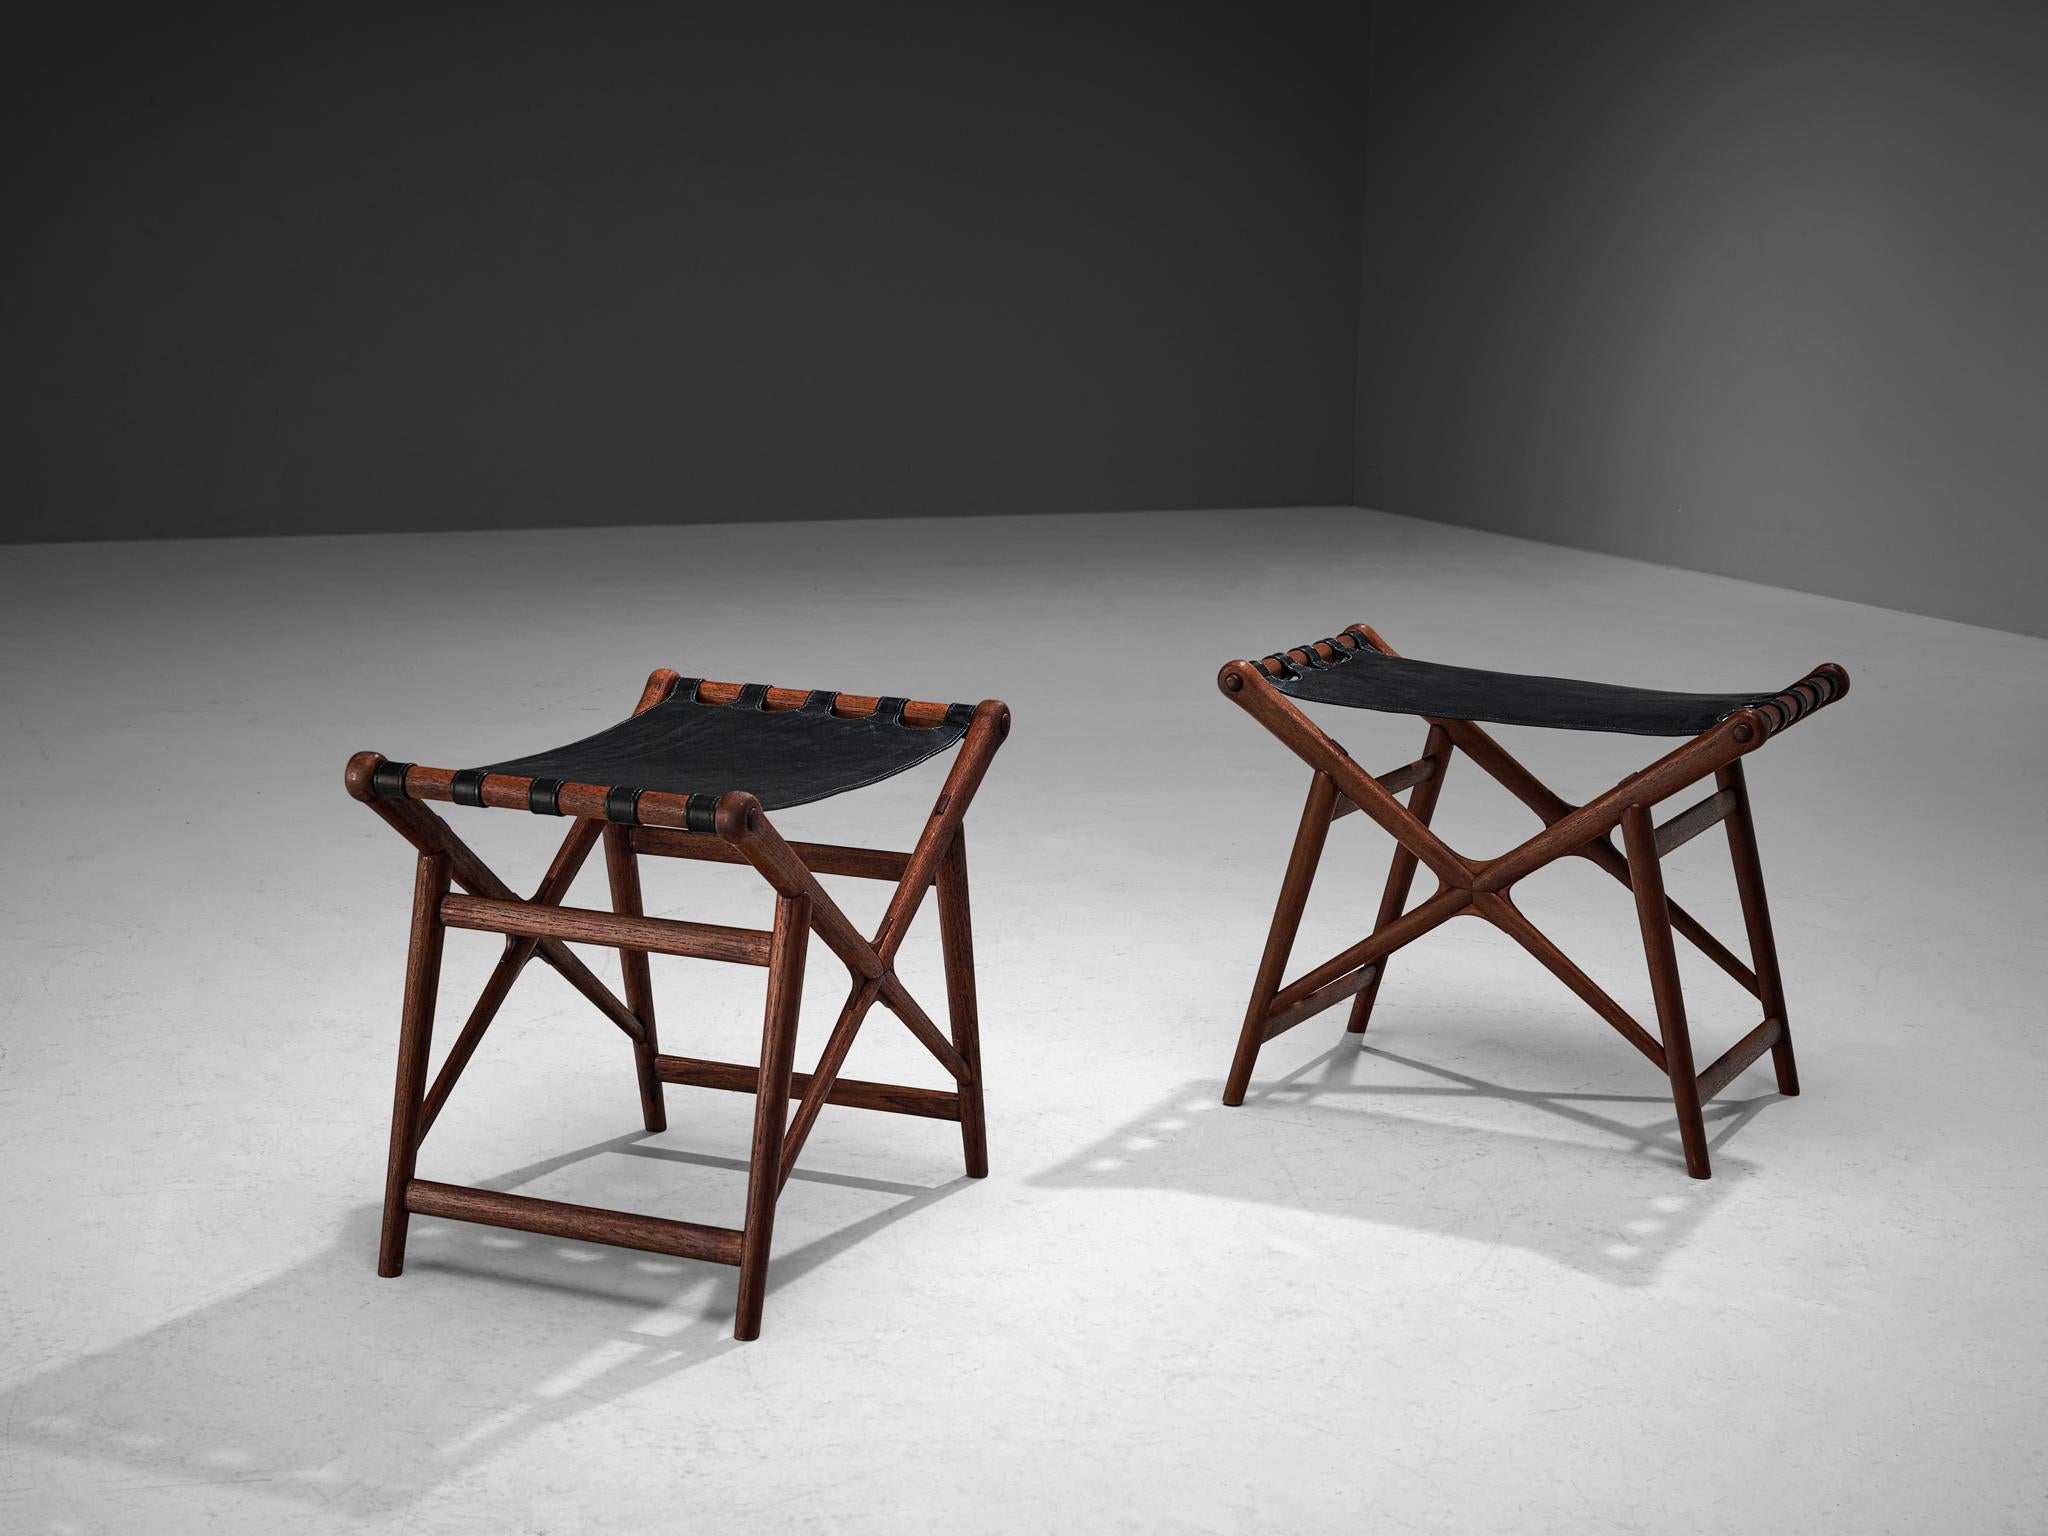 Erik Glemme, stools, teak, leather, Sweden, 1940s. 

Unique pair of custom made stools designed by Erik Glemme. The inspiration for this design was drawn from a folding chair, except these stools cannot be enclosed. Its slender frame is executed